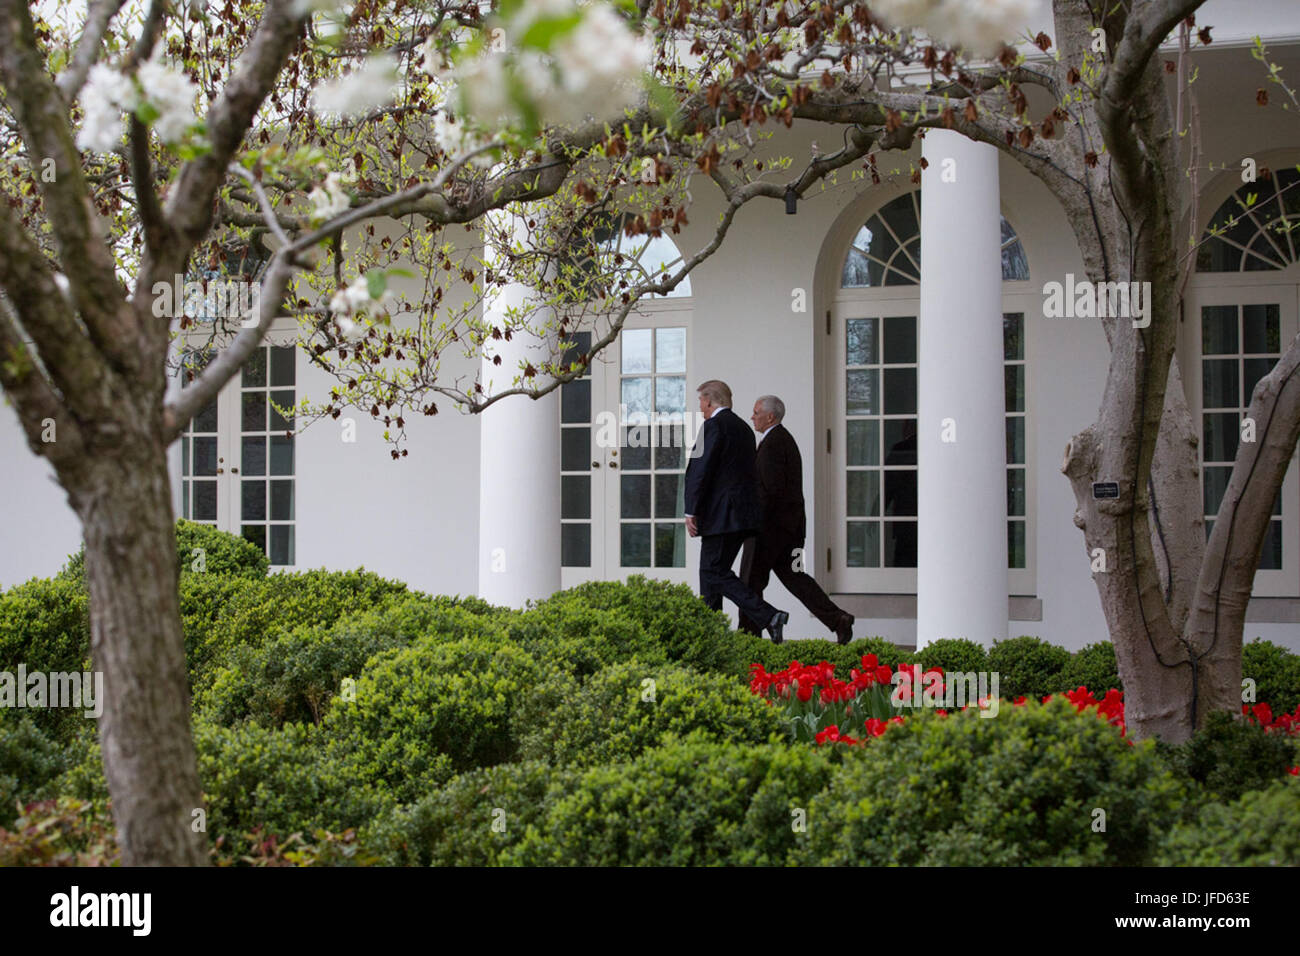 After a working lunch with Egyptian President Abdel Fattah al-Sisi, President Donald Trump and Vice President Mike Pence walk along the West Colonnade on Monday, April 3, 2017, en route to the Oval Office at the White House in Washington, D.C. (Official White House Photo by Benjamin Applebaum) Stock Photo